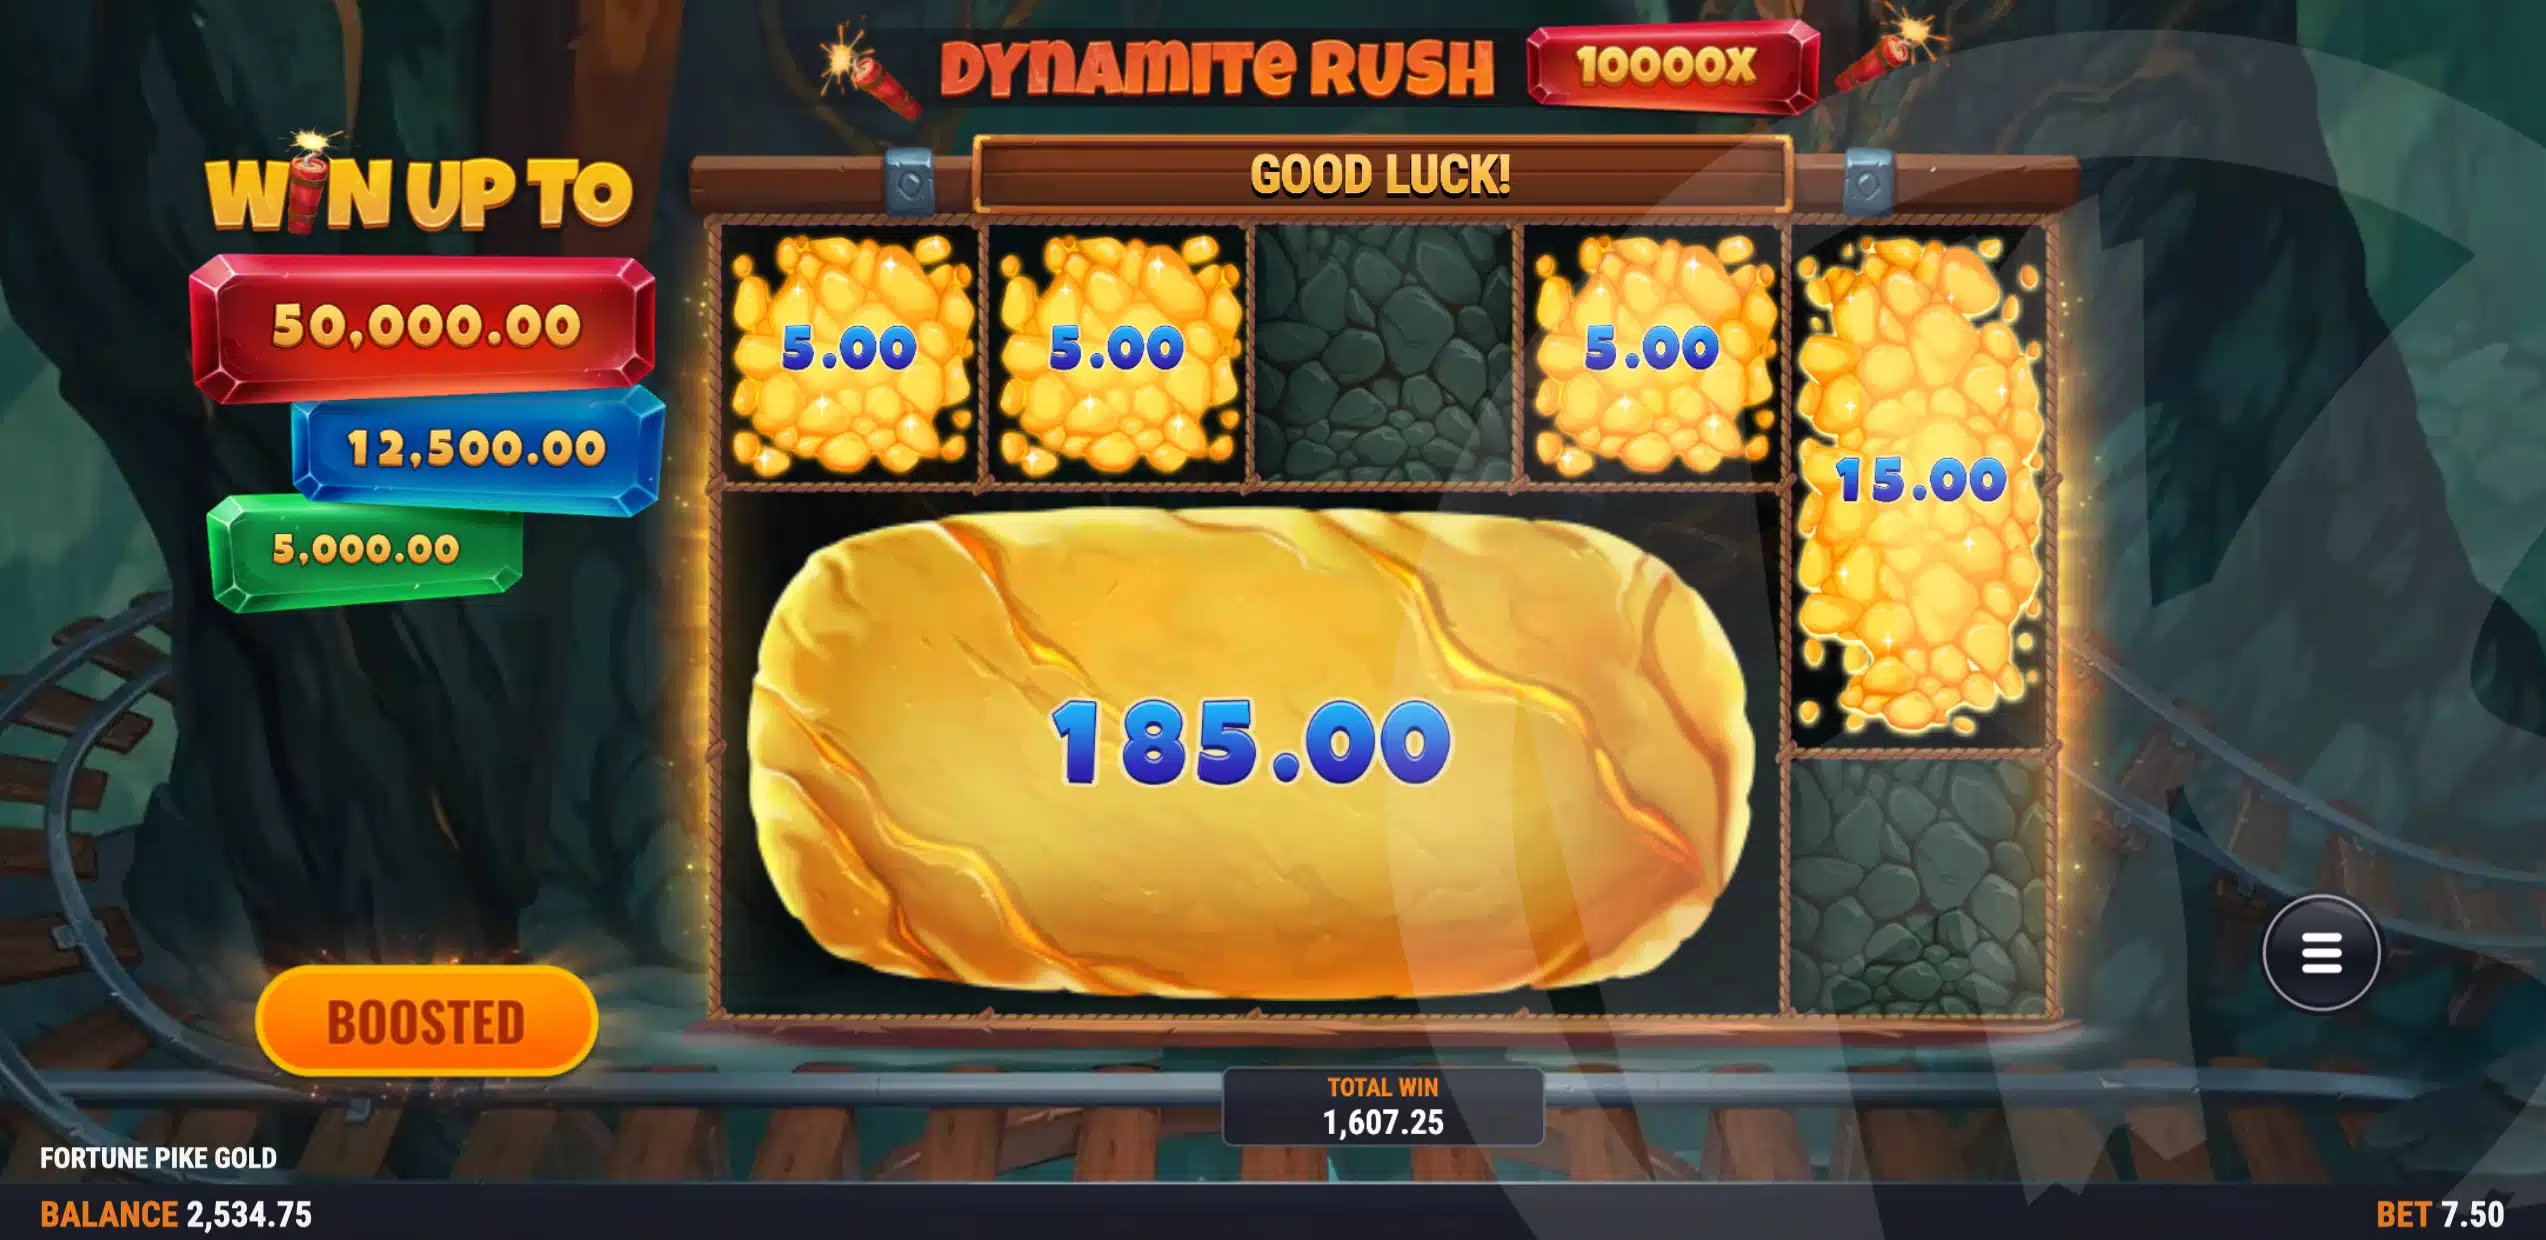 Land 6 or More Dynamite Symbols During Free Spins To Trigger the Dynamite Rush Game